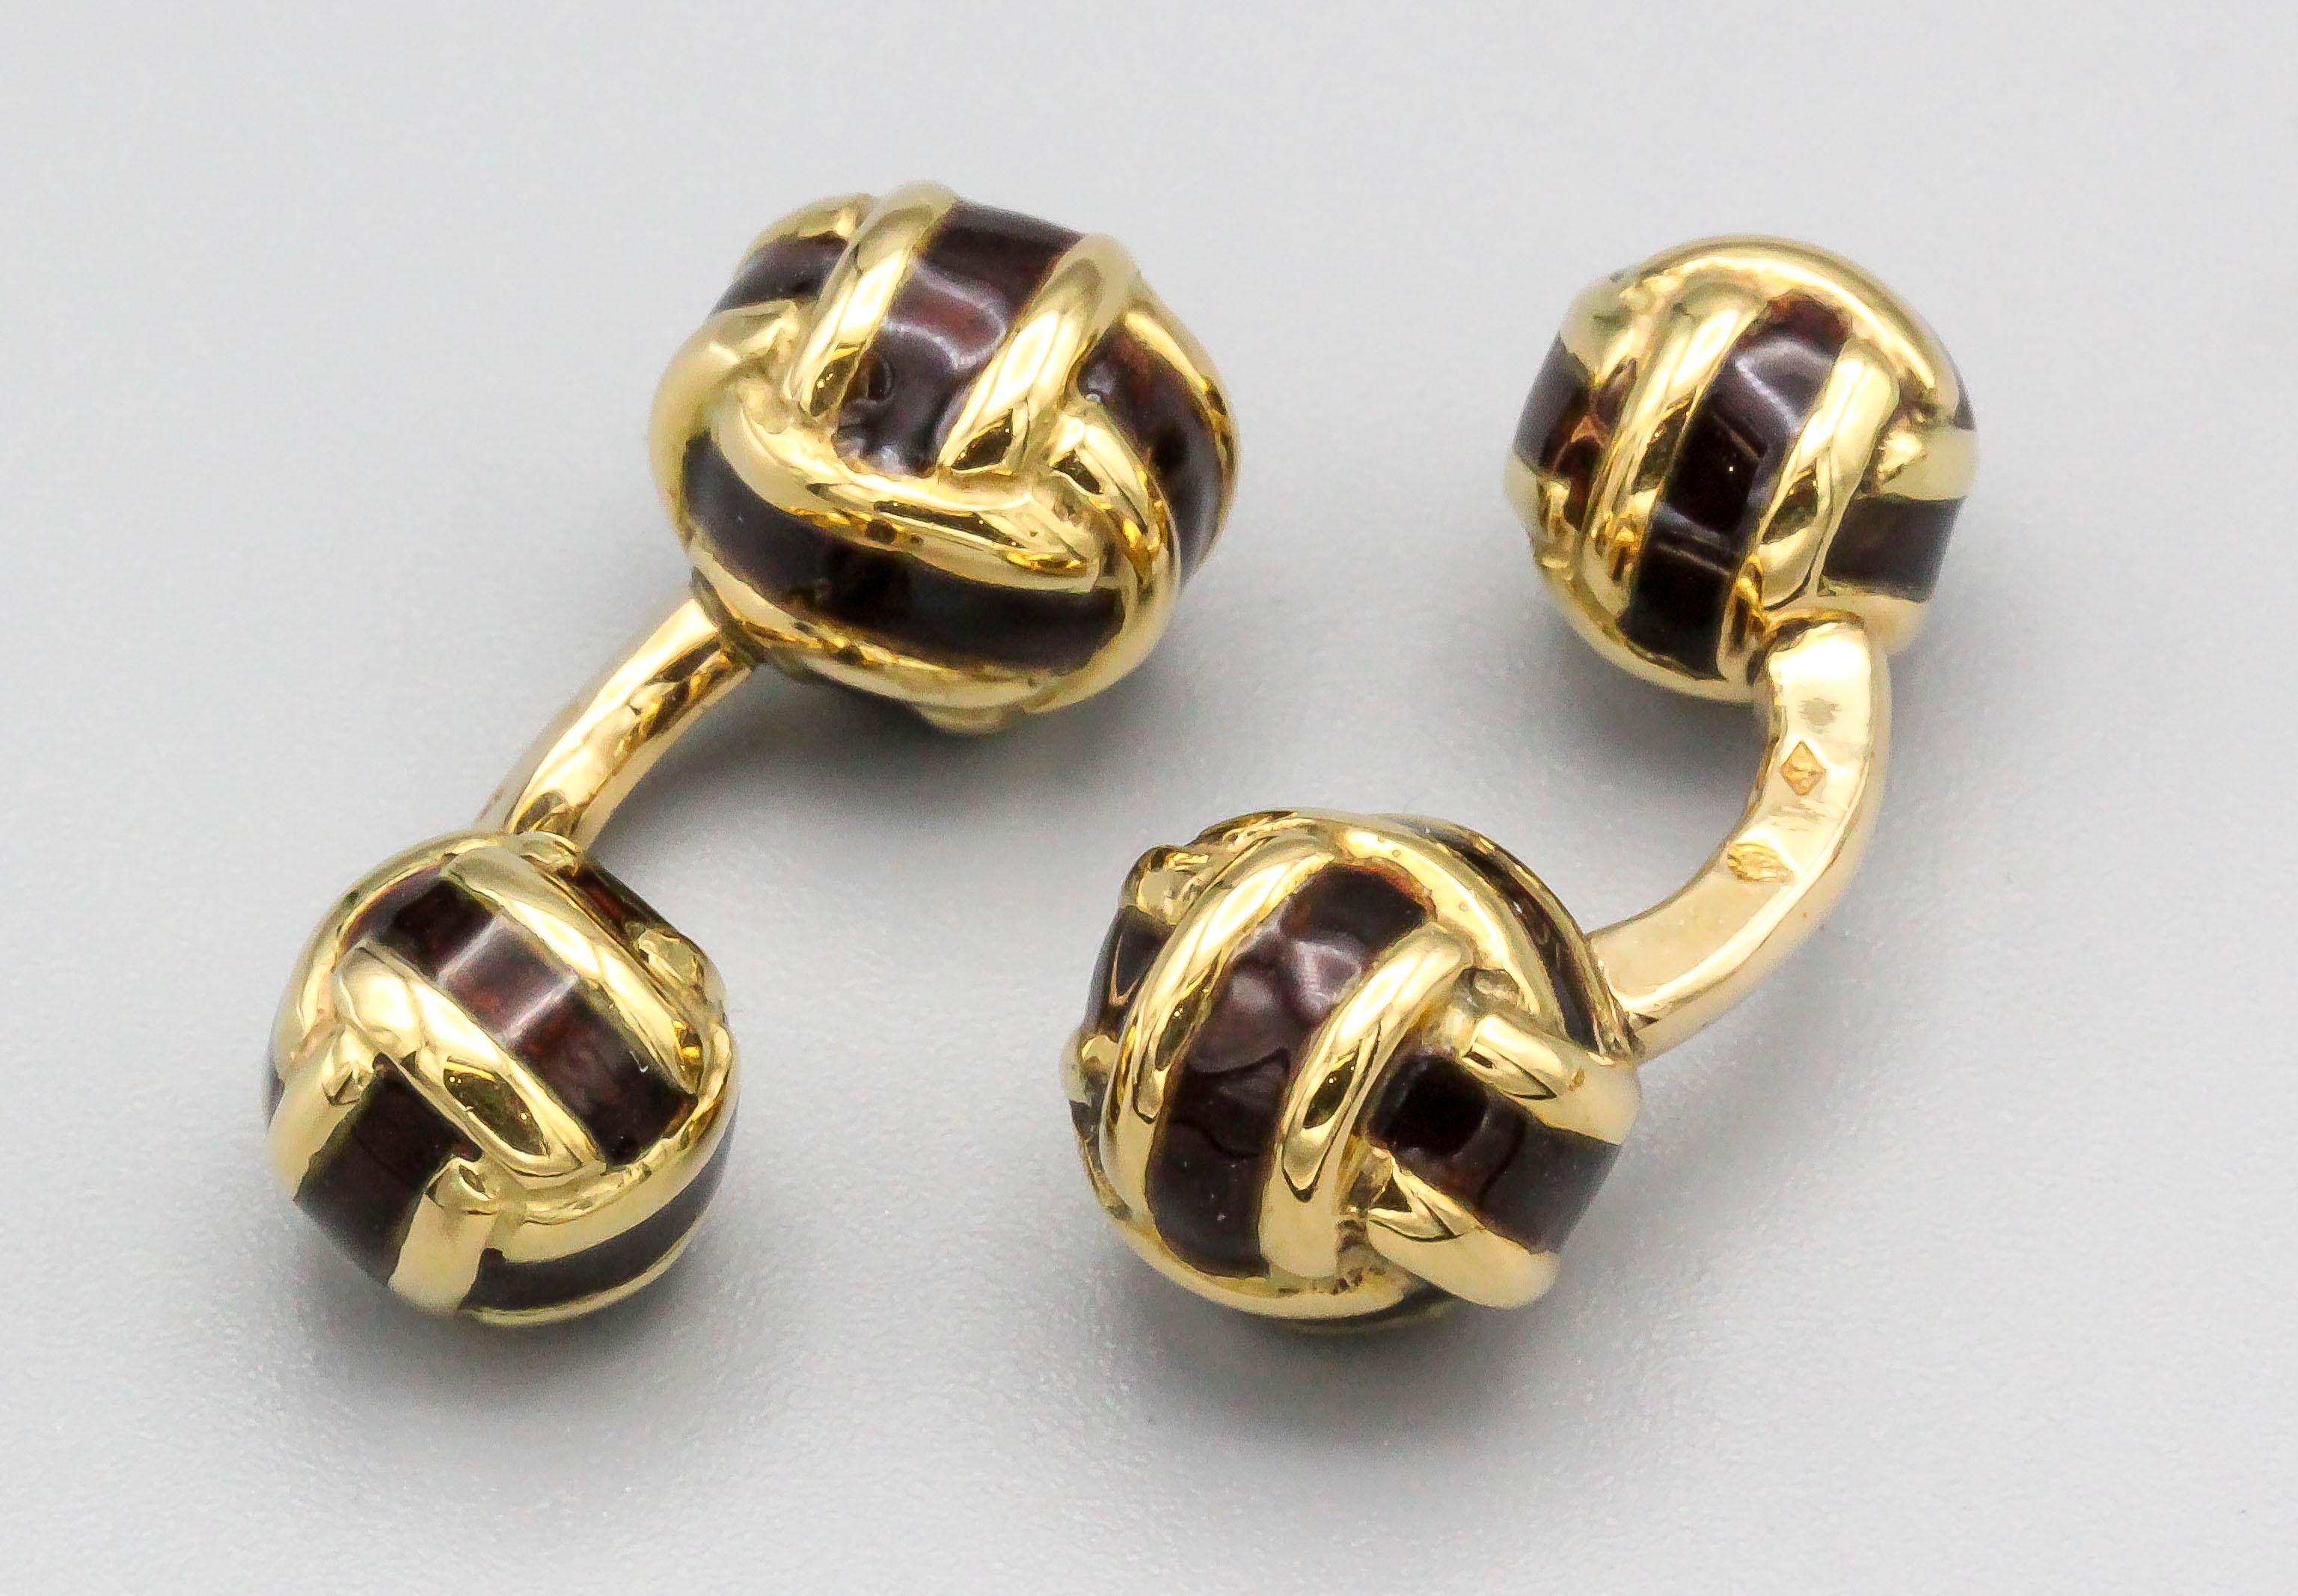 Classic and elegant 18K yellow  gold and dark brown enamel cufflink stud set of French origin. They resemble knots, with one side slightly larger than the other on the cufflinks. Includes four studs.

Hallmarks: French 18K gold assay mark, maker's